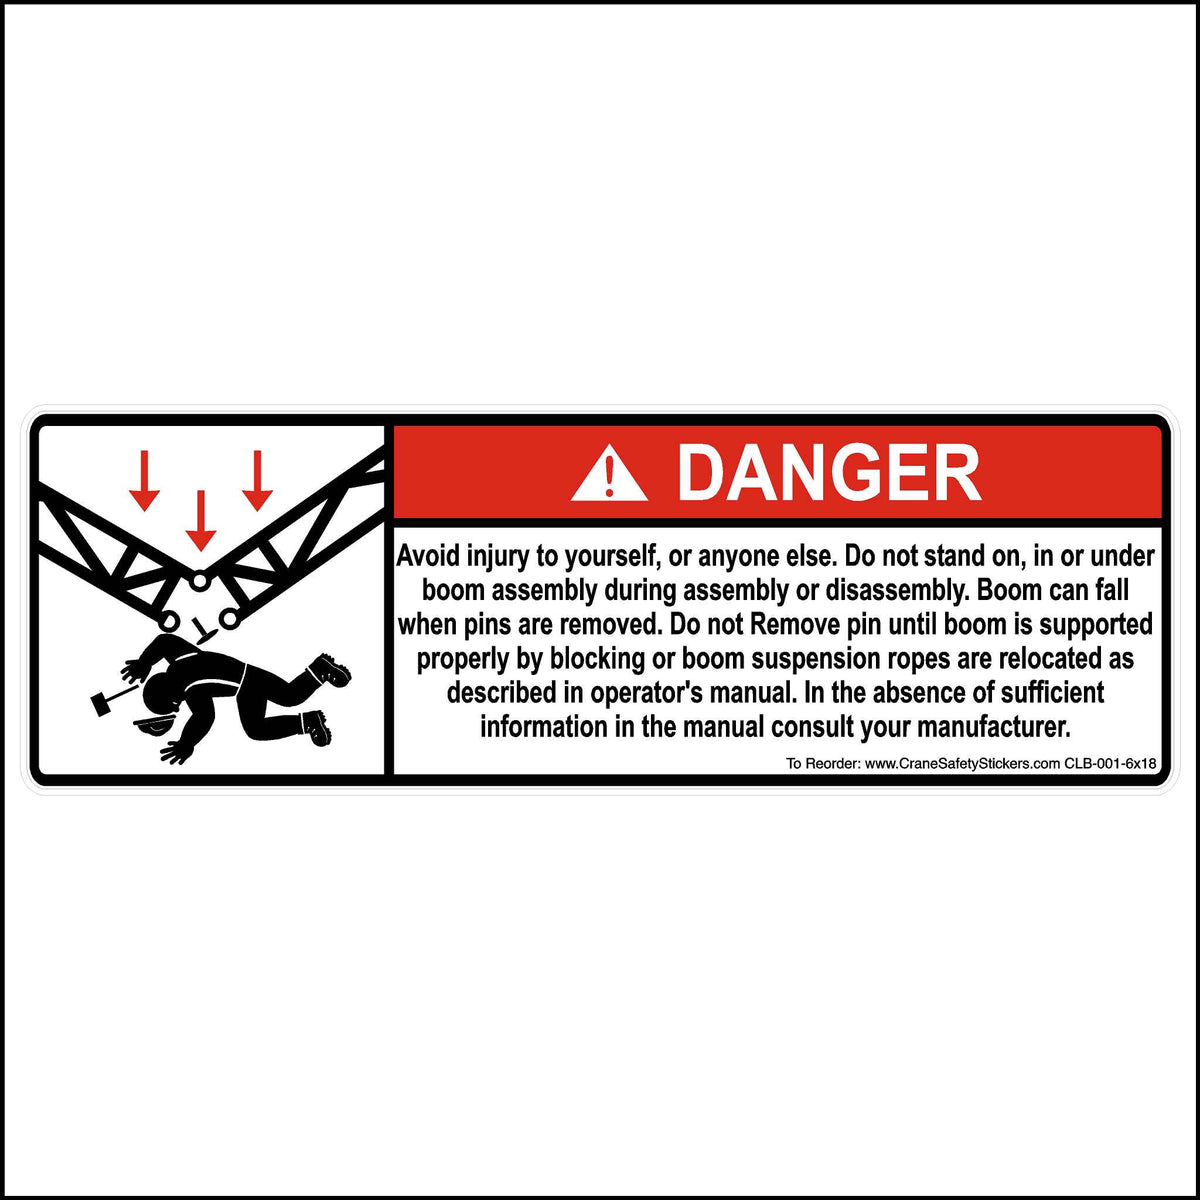 6x18 Inch Lattice Boom Safety Sticker Printed With, DANGER, Avoid injury to yourself, or anyone else. Do not stand on, in or under boom assembly during assembly or disassembly. Boom can fall when pins are removed. Do not Remove pin until boom is supported properly by blocking or boom suspension ropes are relocated as described in operator&#39;s manual. In the absence of sufficient information in the manual consult your manufacturer.